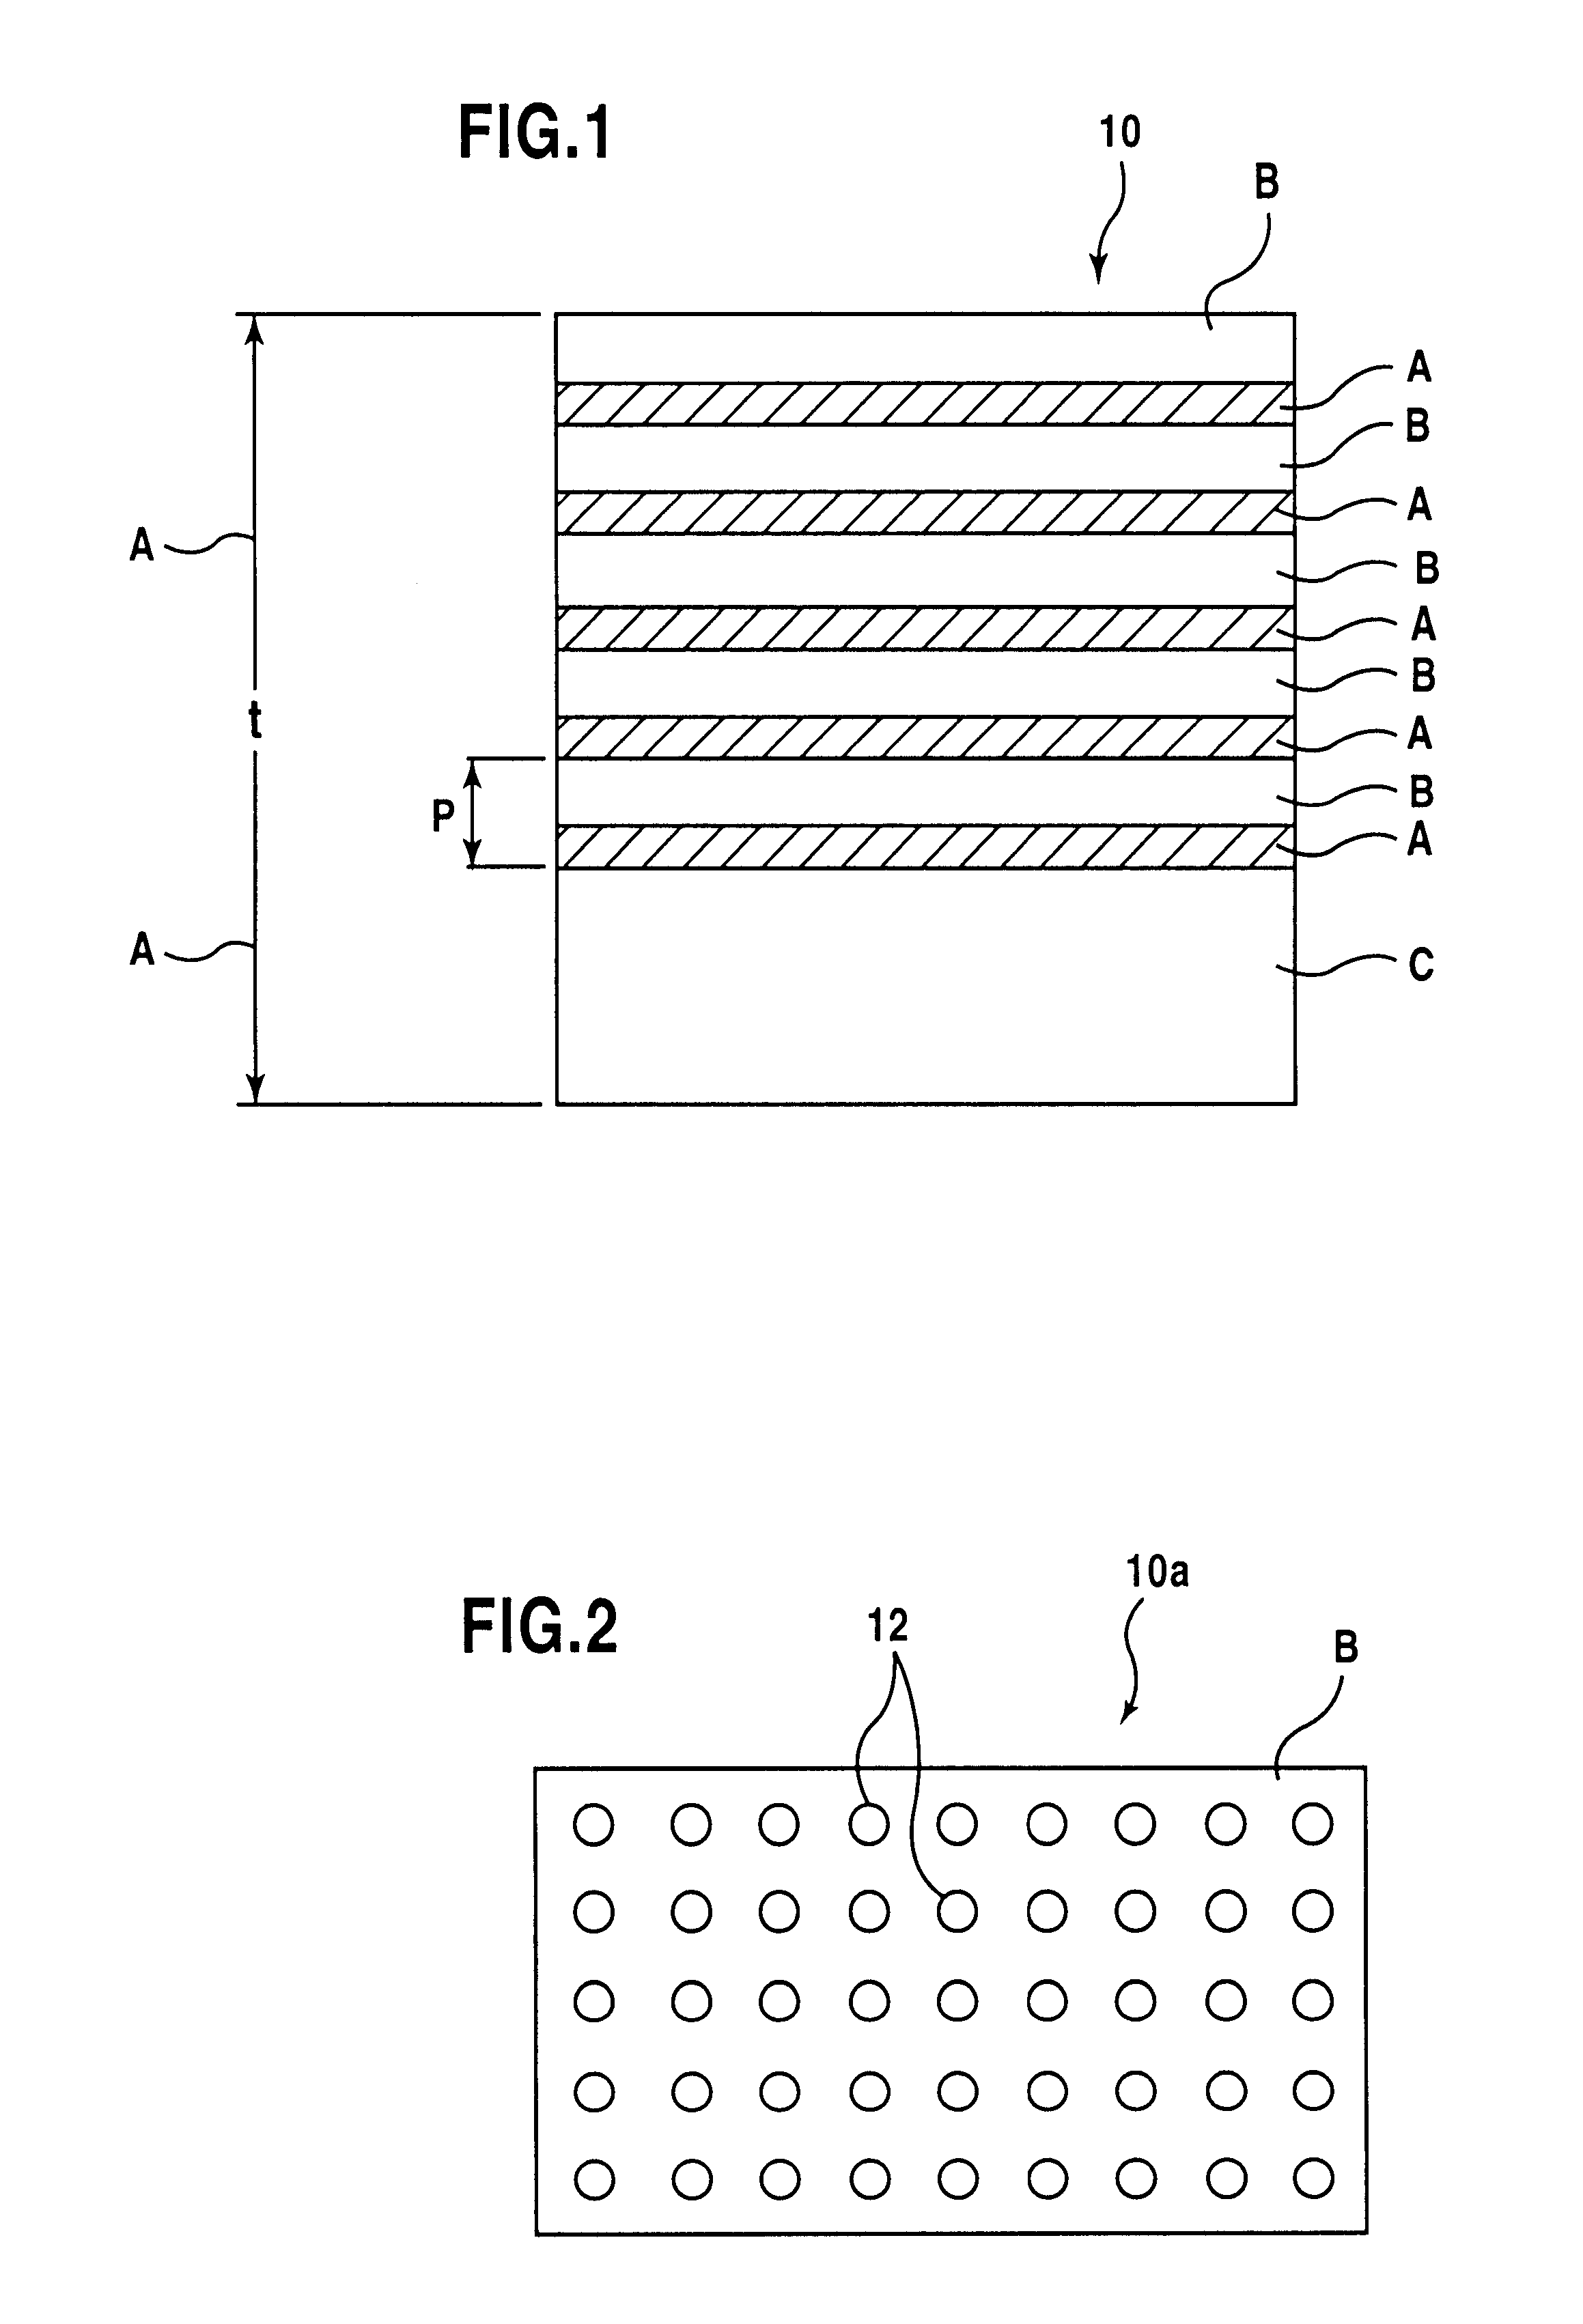 Optical function device with photonic band gap and/or filtering characteristics